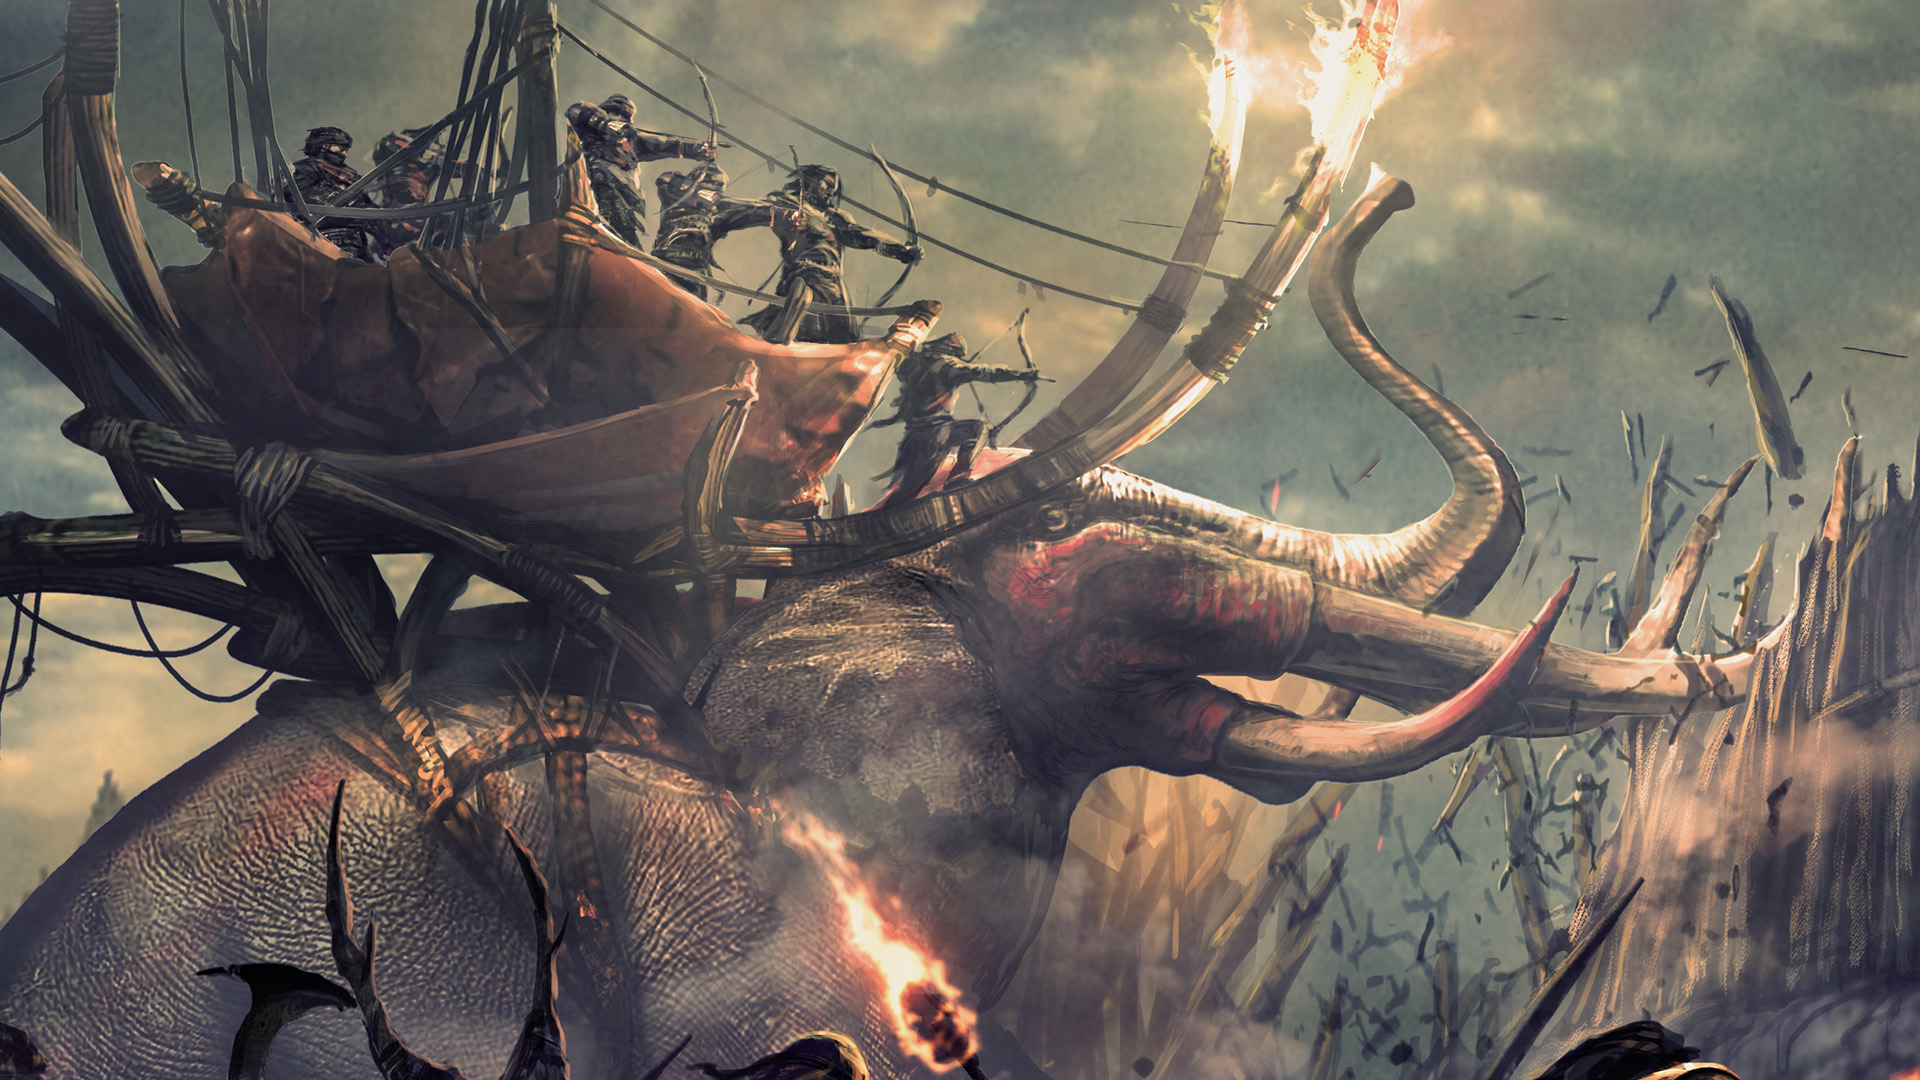 A crop of the concept art showing riders on top of a giant mammoth.